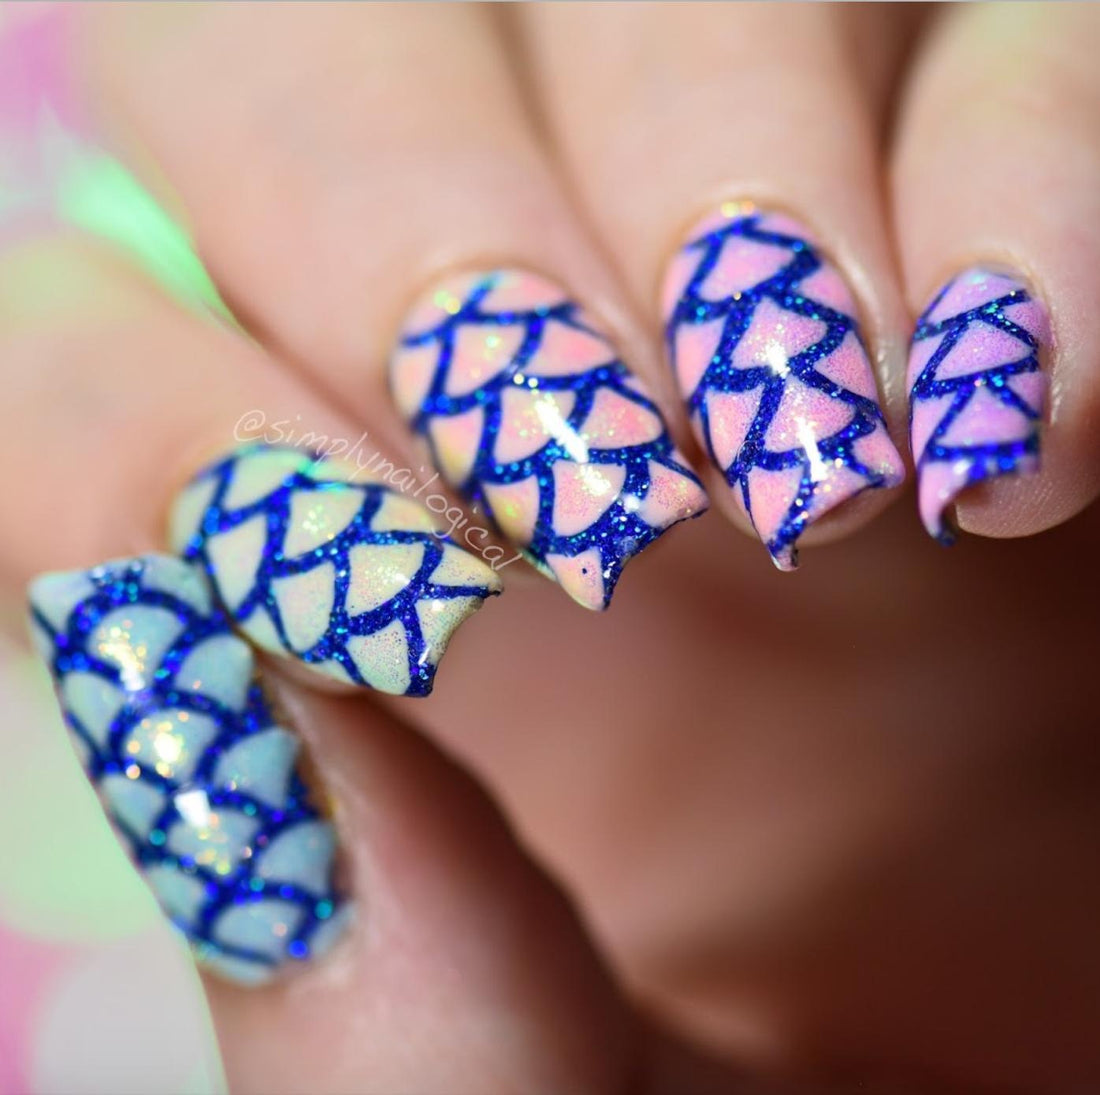 Best Nail Art Course online With Government Certification